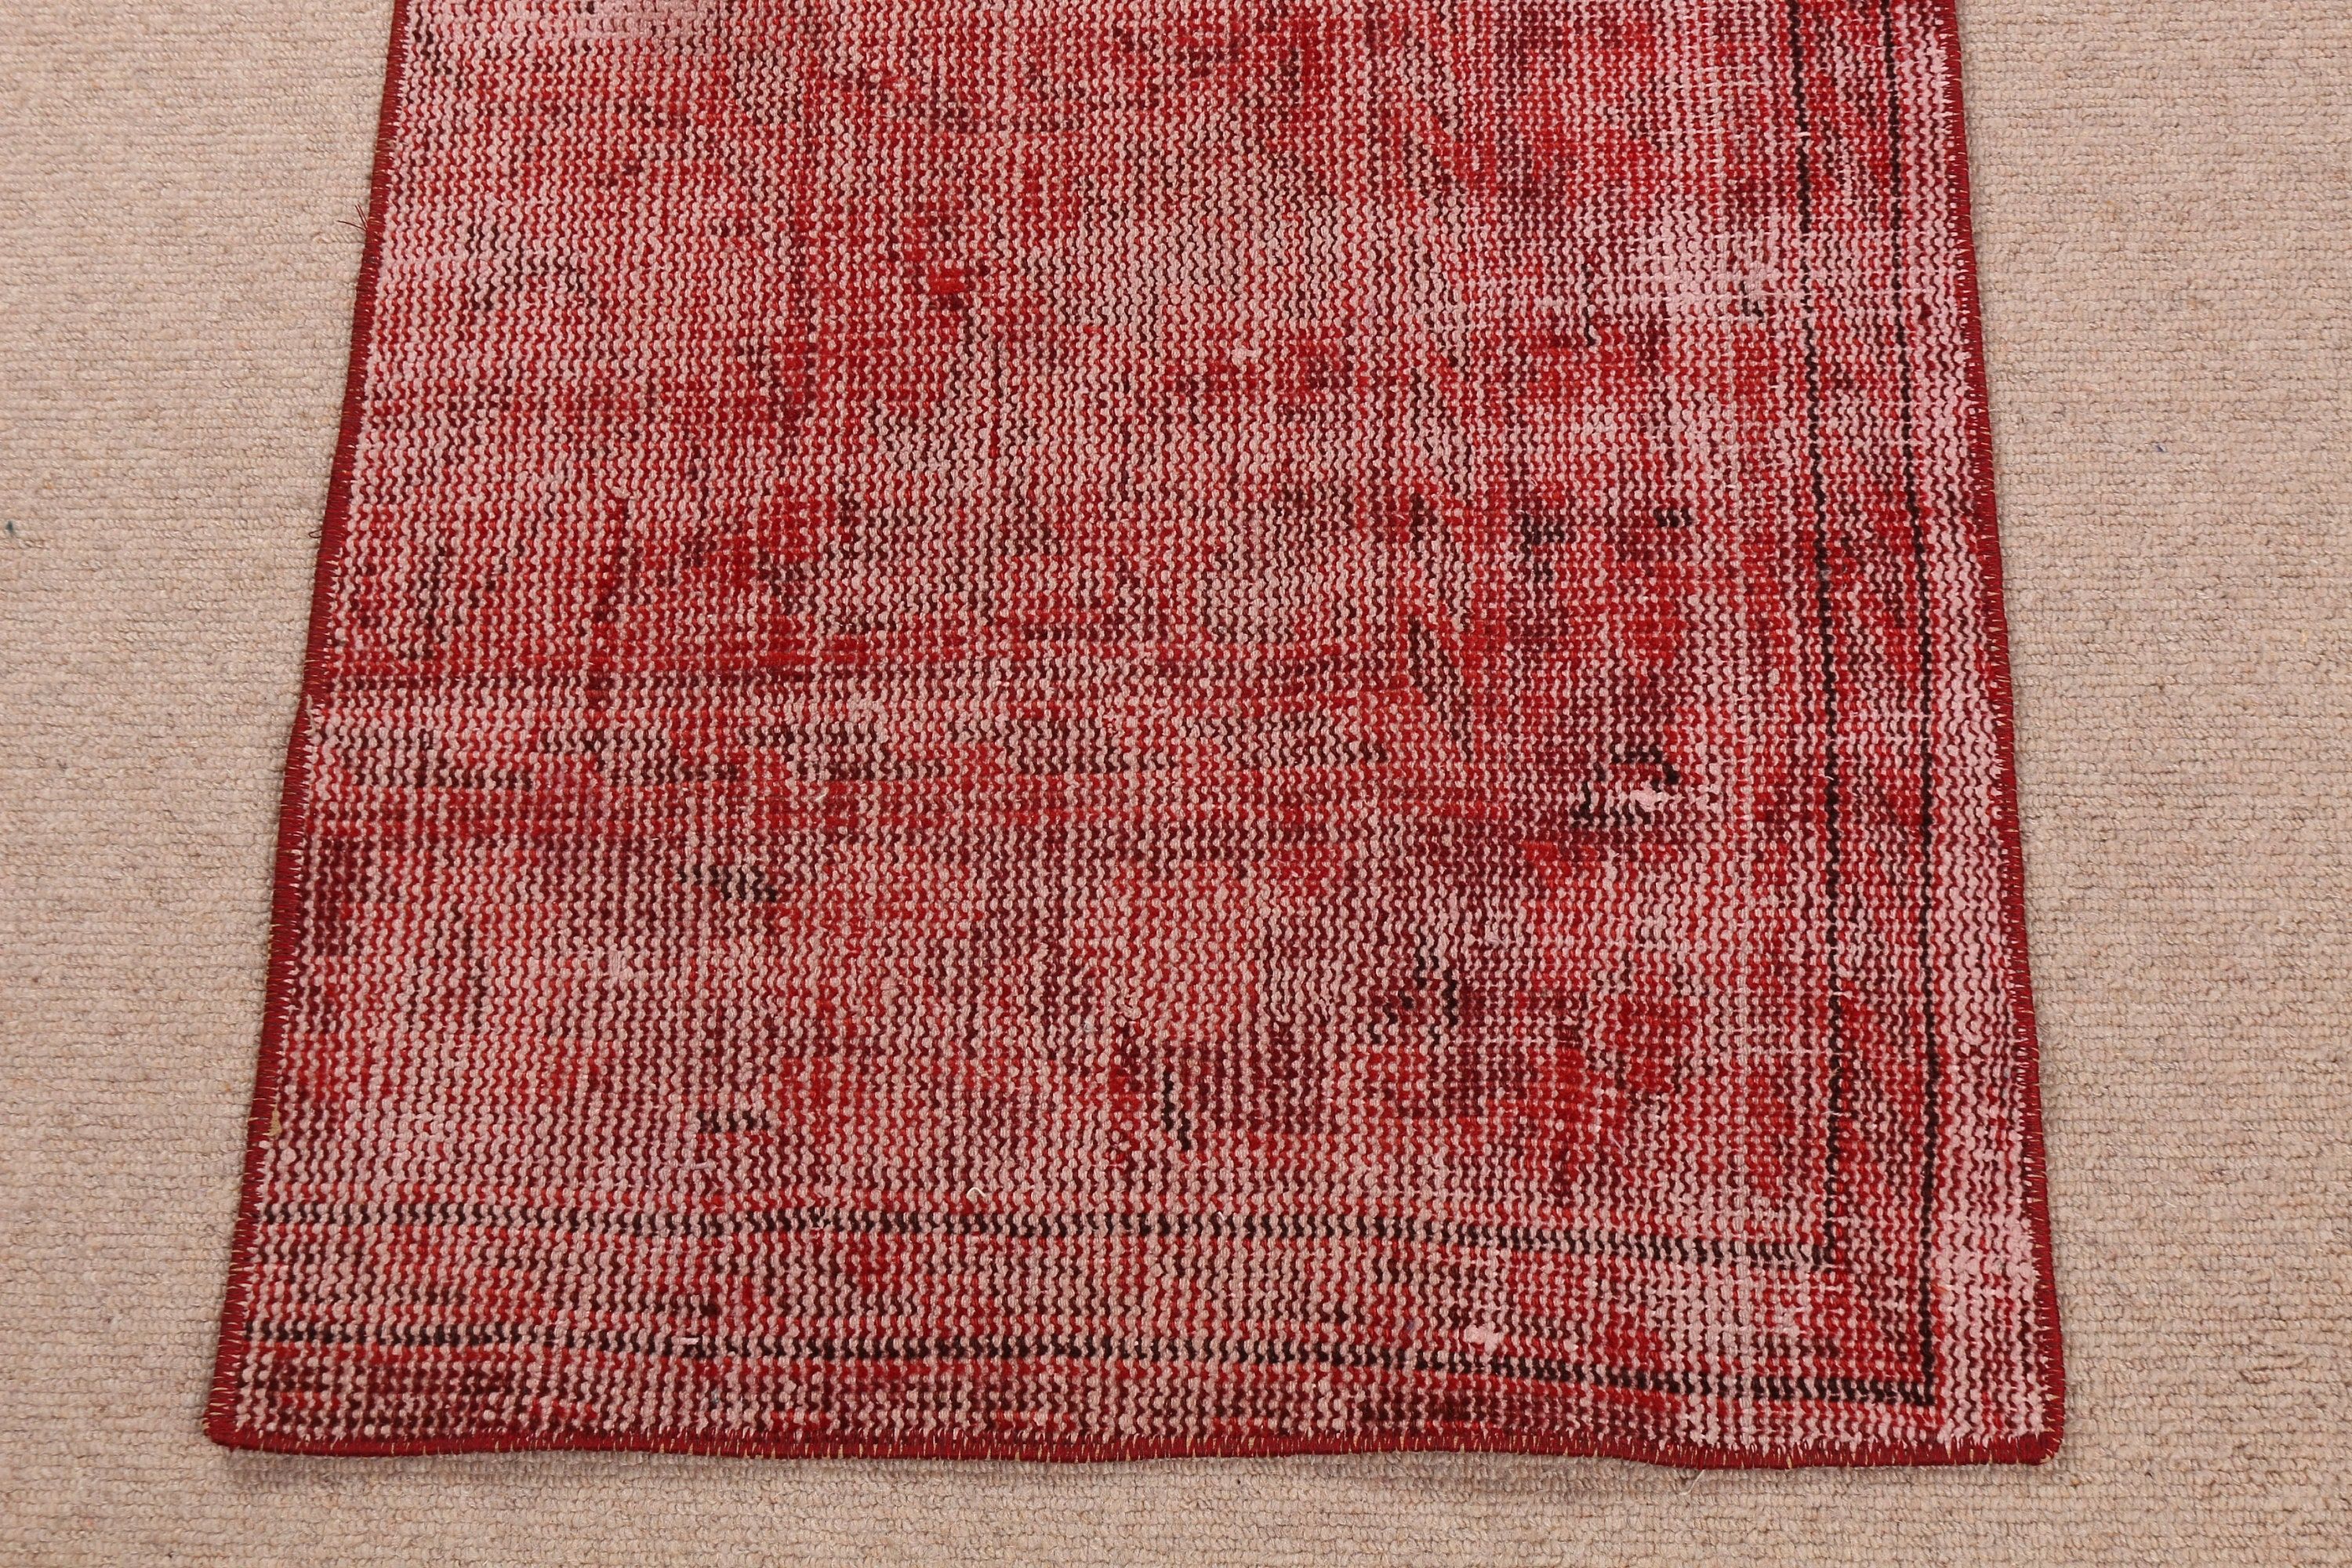 Vintage Rug, Bathroom Rugs, Oriental Rug, Rugs for Kitchen, Turkish Rug, Old Rug, Anatolian Rug, Red  1.9x3.8 ft Small Rugs